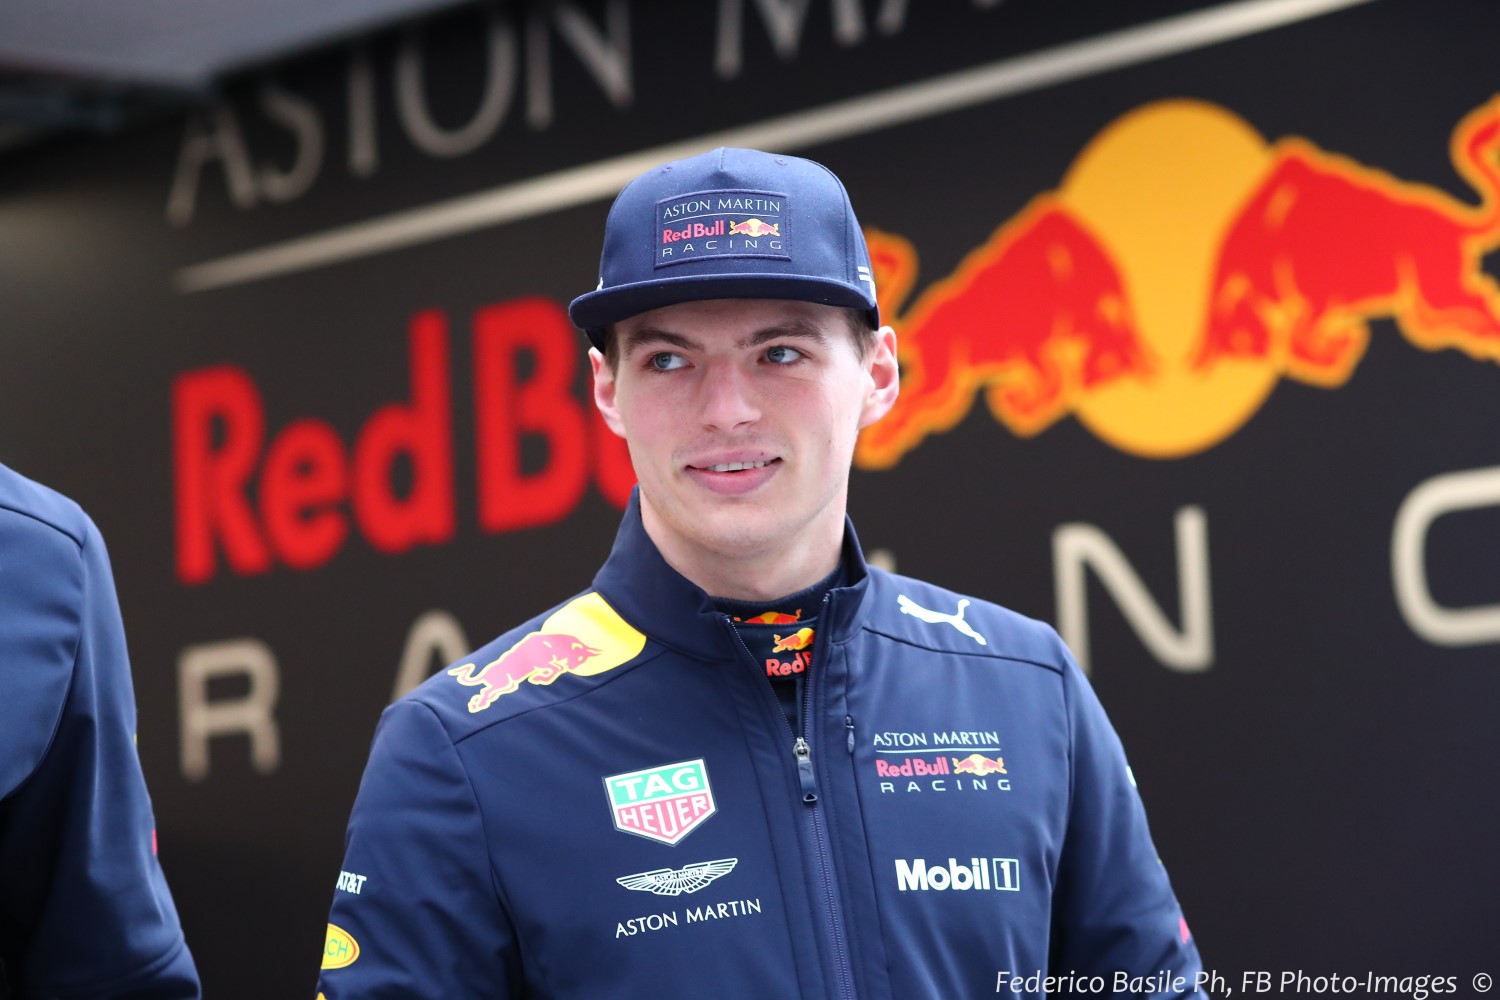 Verstappen remains faithful to Red Bull but says anyone can win in Hamilton's car. Let's not forget F1 is 99% car and 1% driver